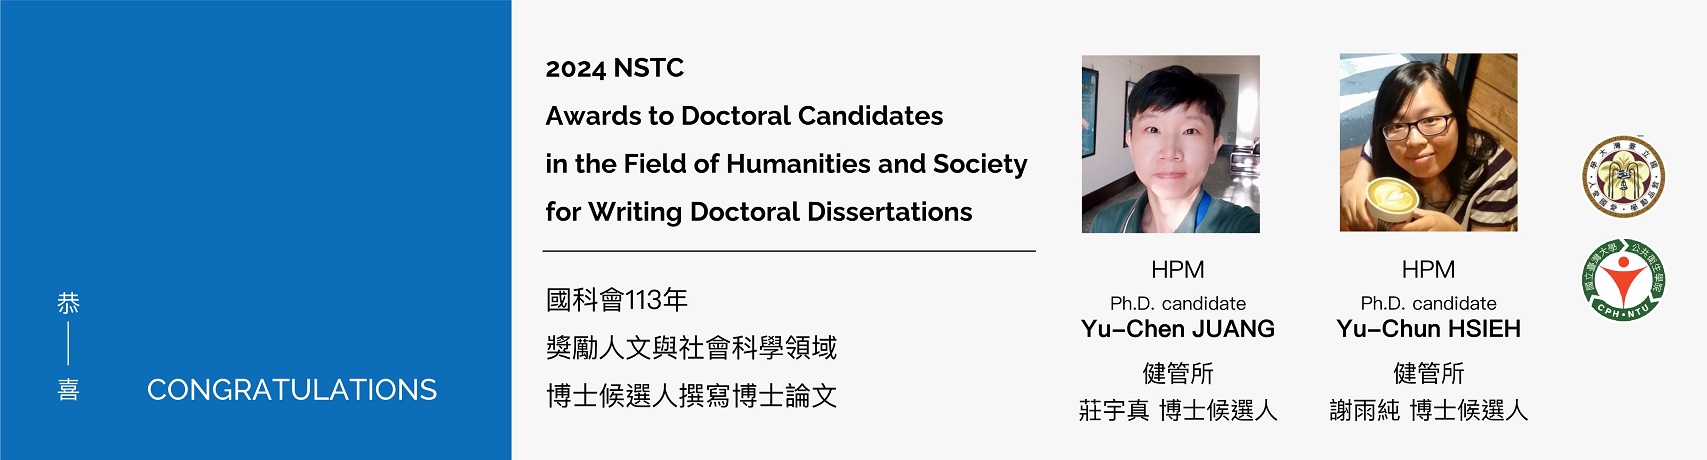 【Congratulations!】HPM Ph.D. candidates awarded 2024 NSTC Awards to doctoral candidates in the field of humanities and...